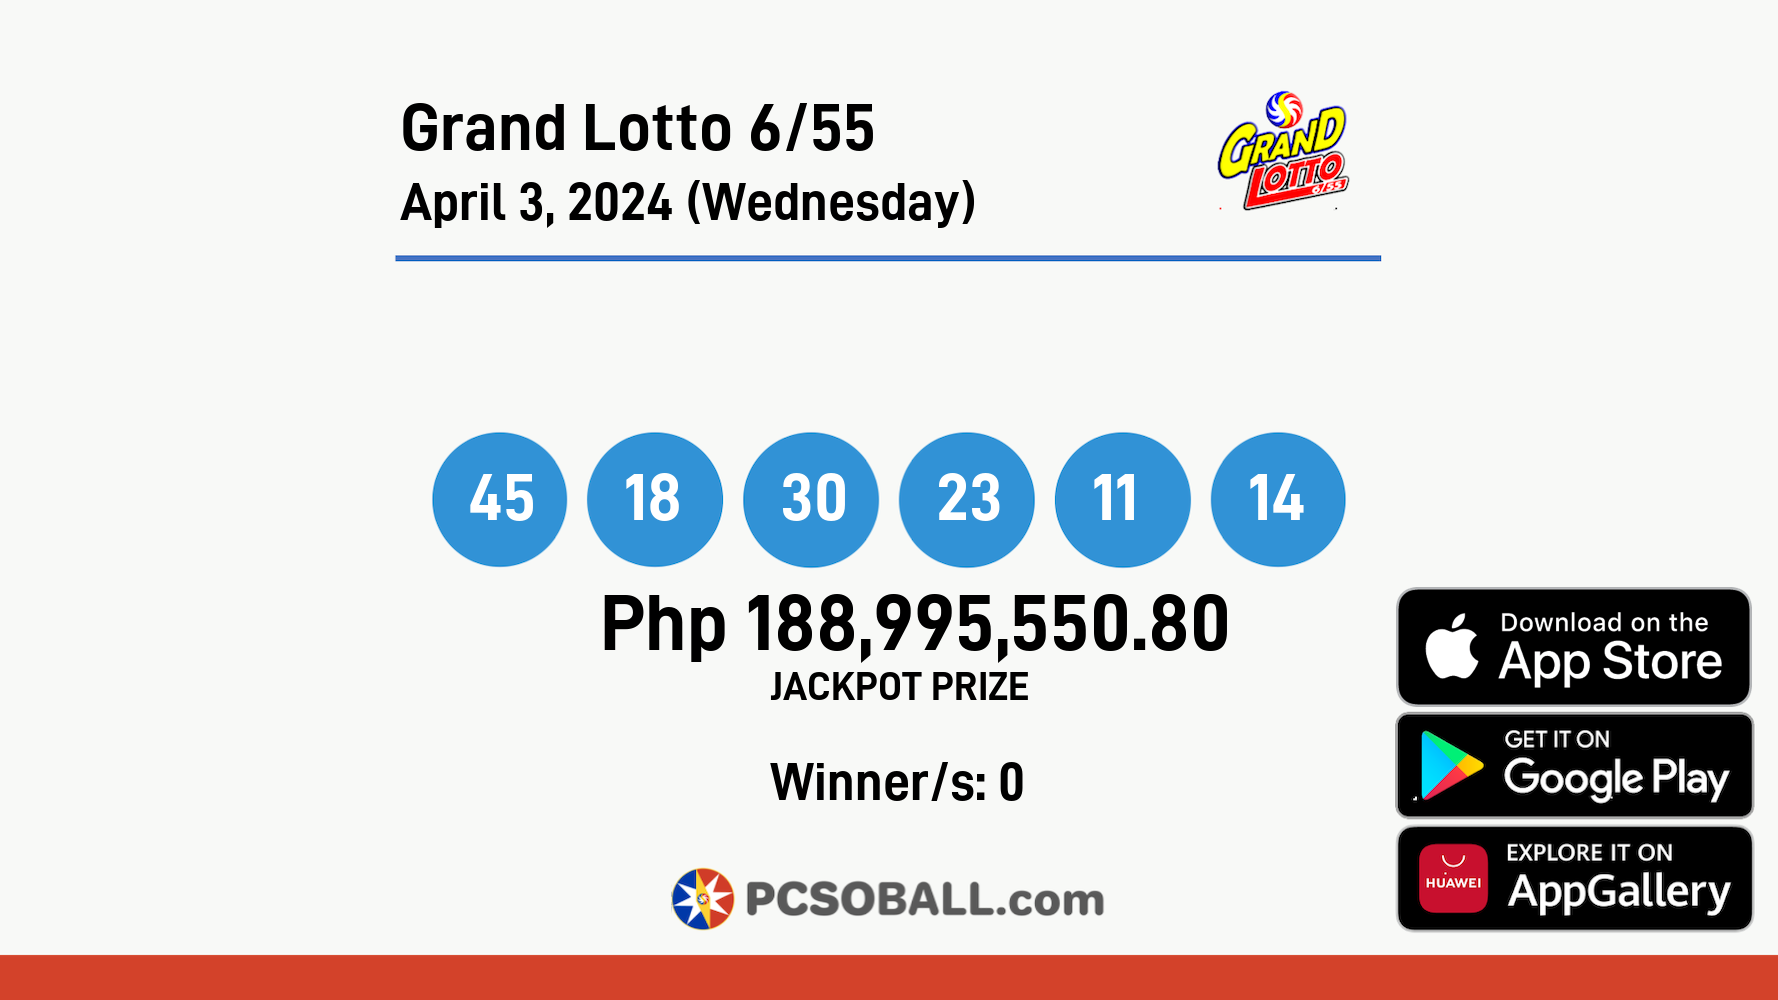 Grand Lotto 6/55 April 3, 2024 (Wednesday) Result